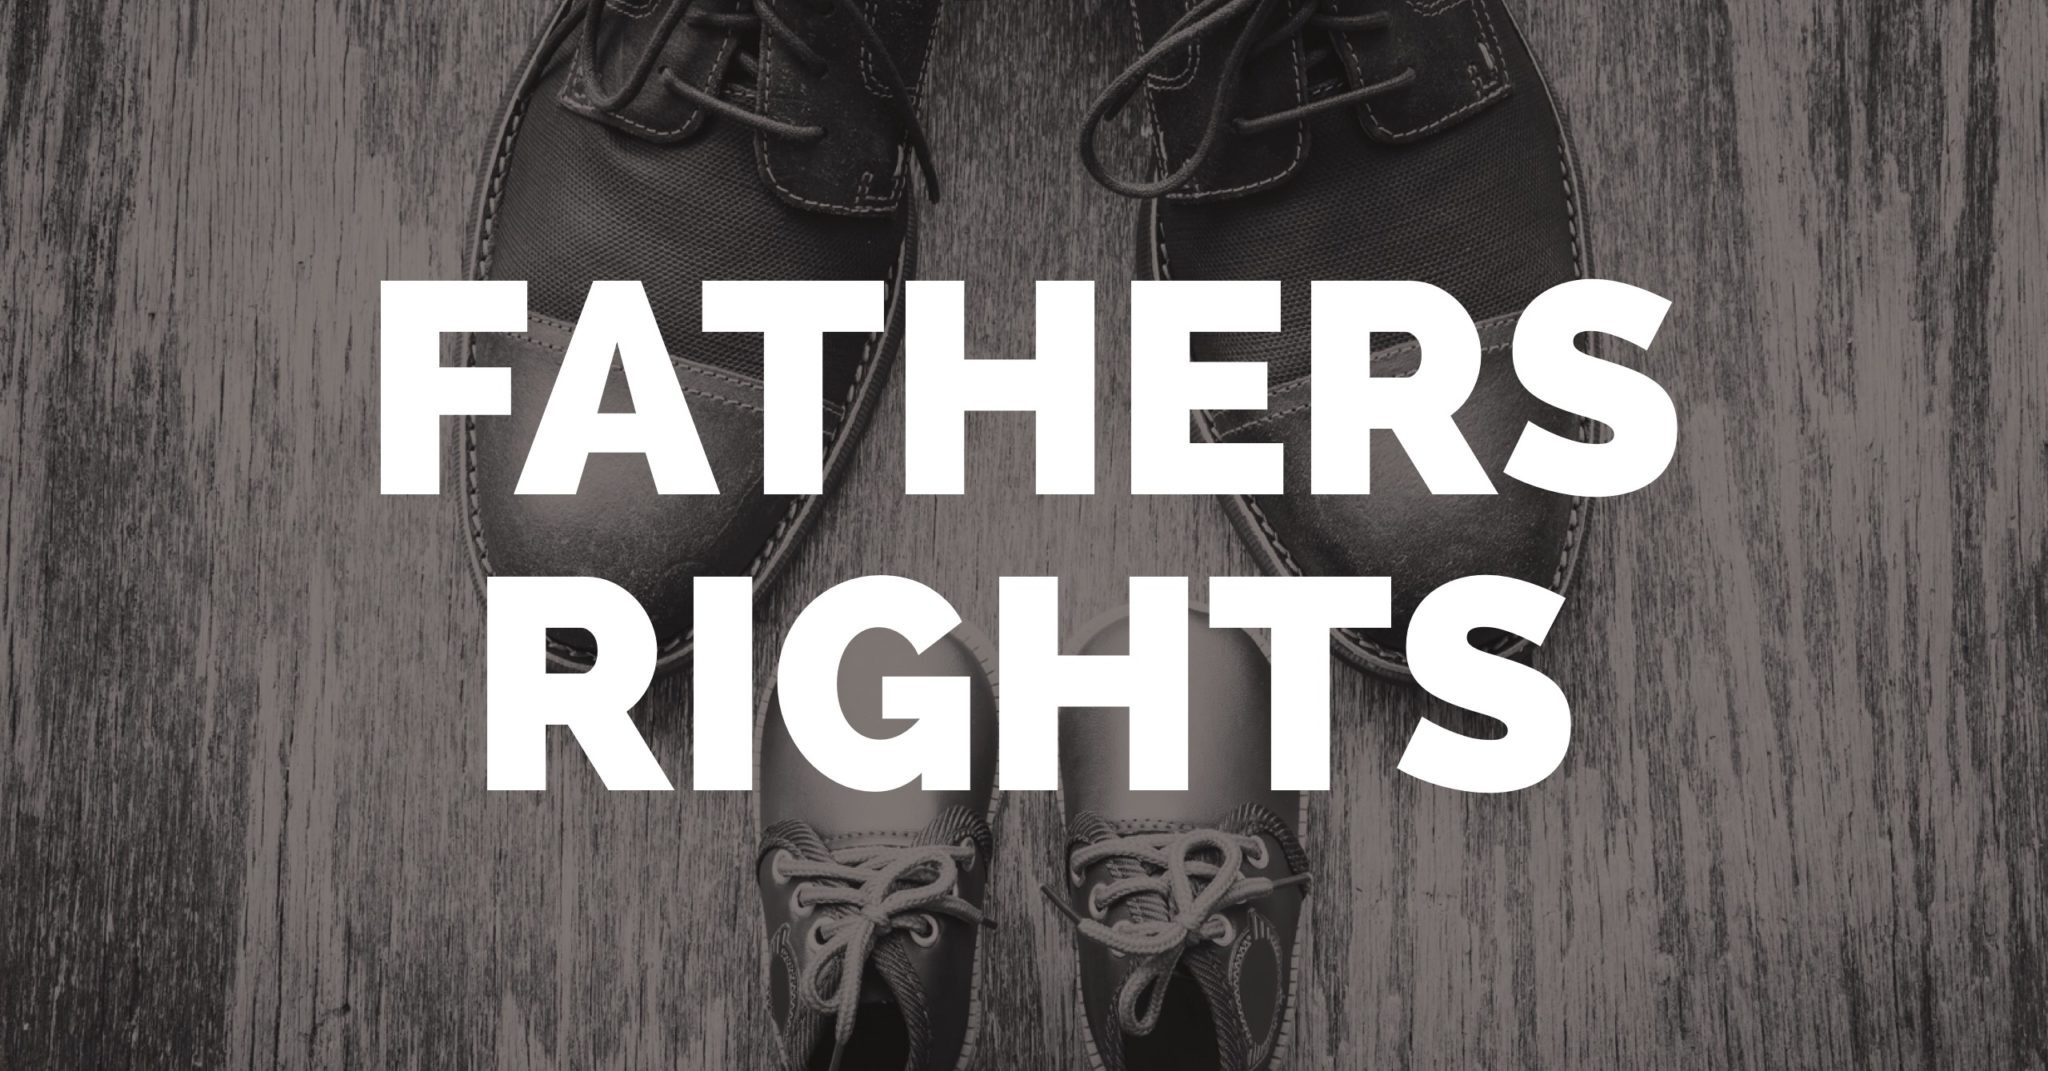 Child Custody Rights For Fathers Know Your Fathers Rights Owen Hodge